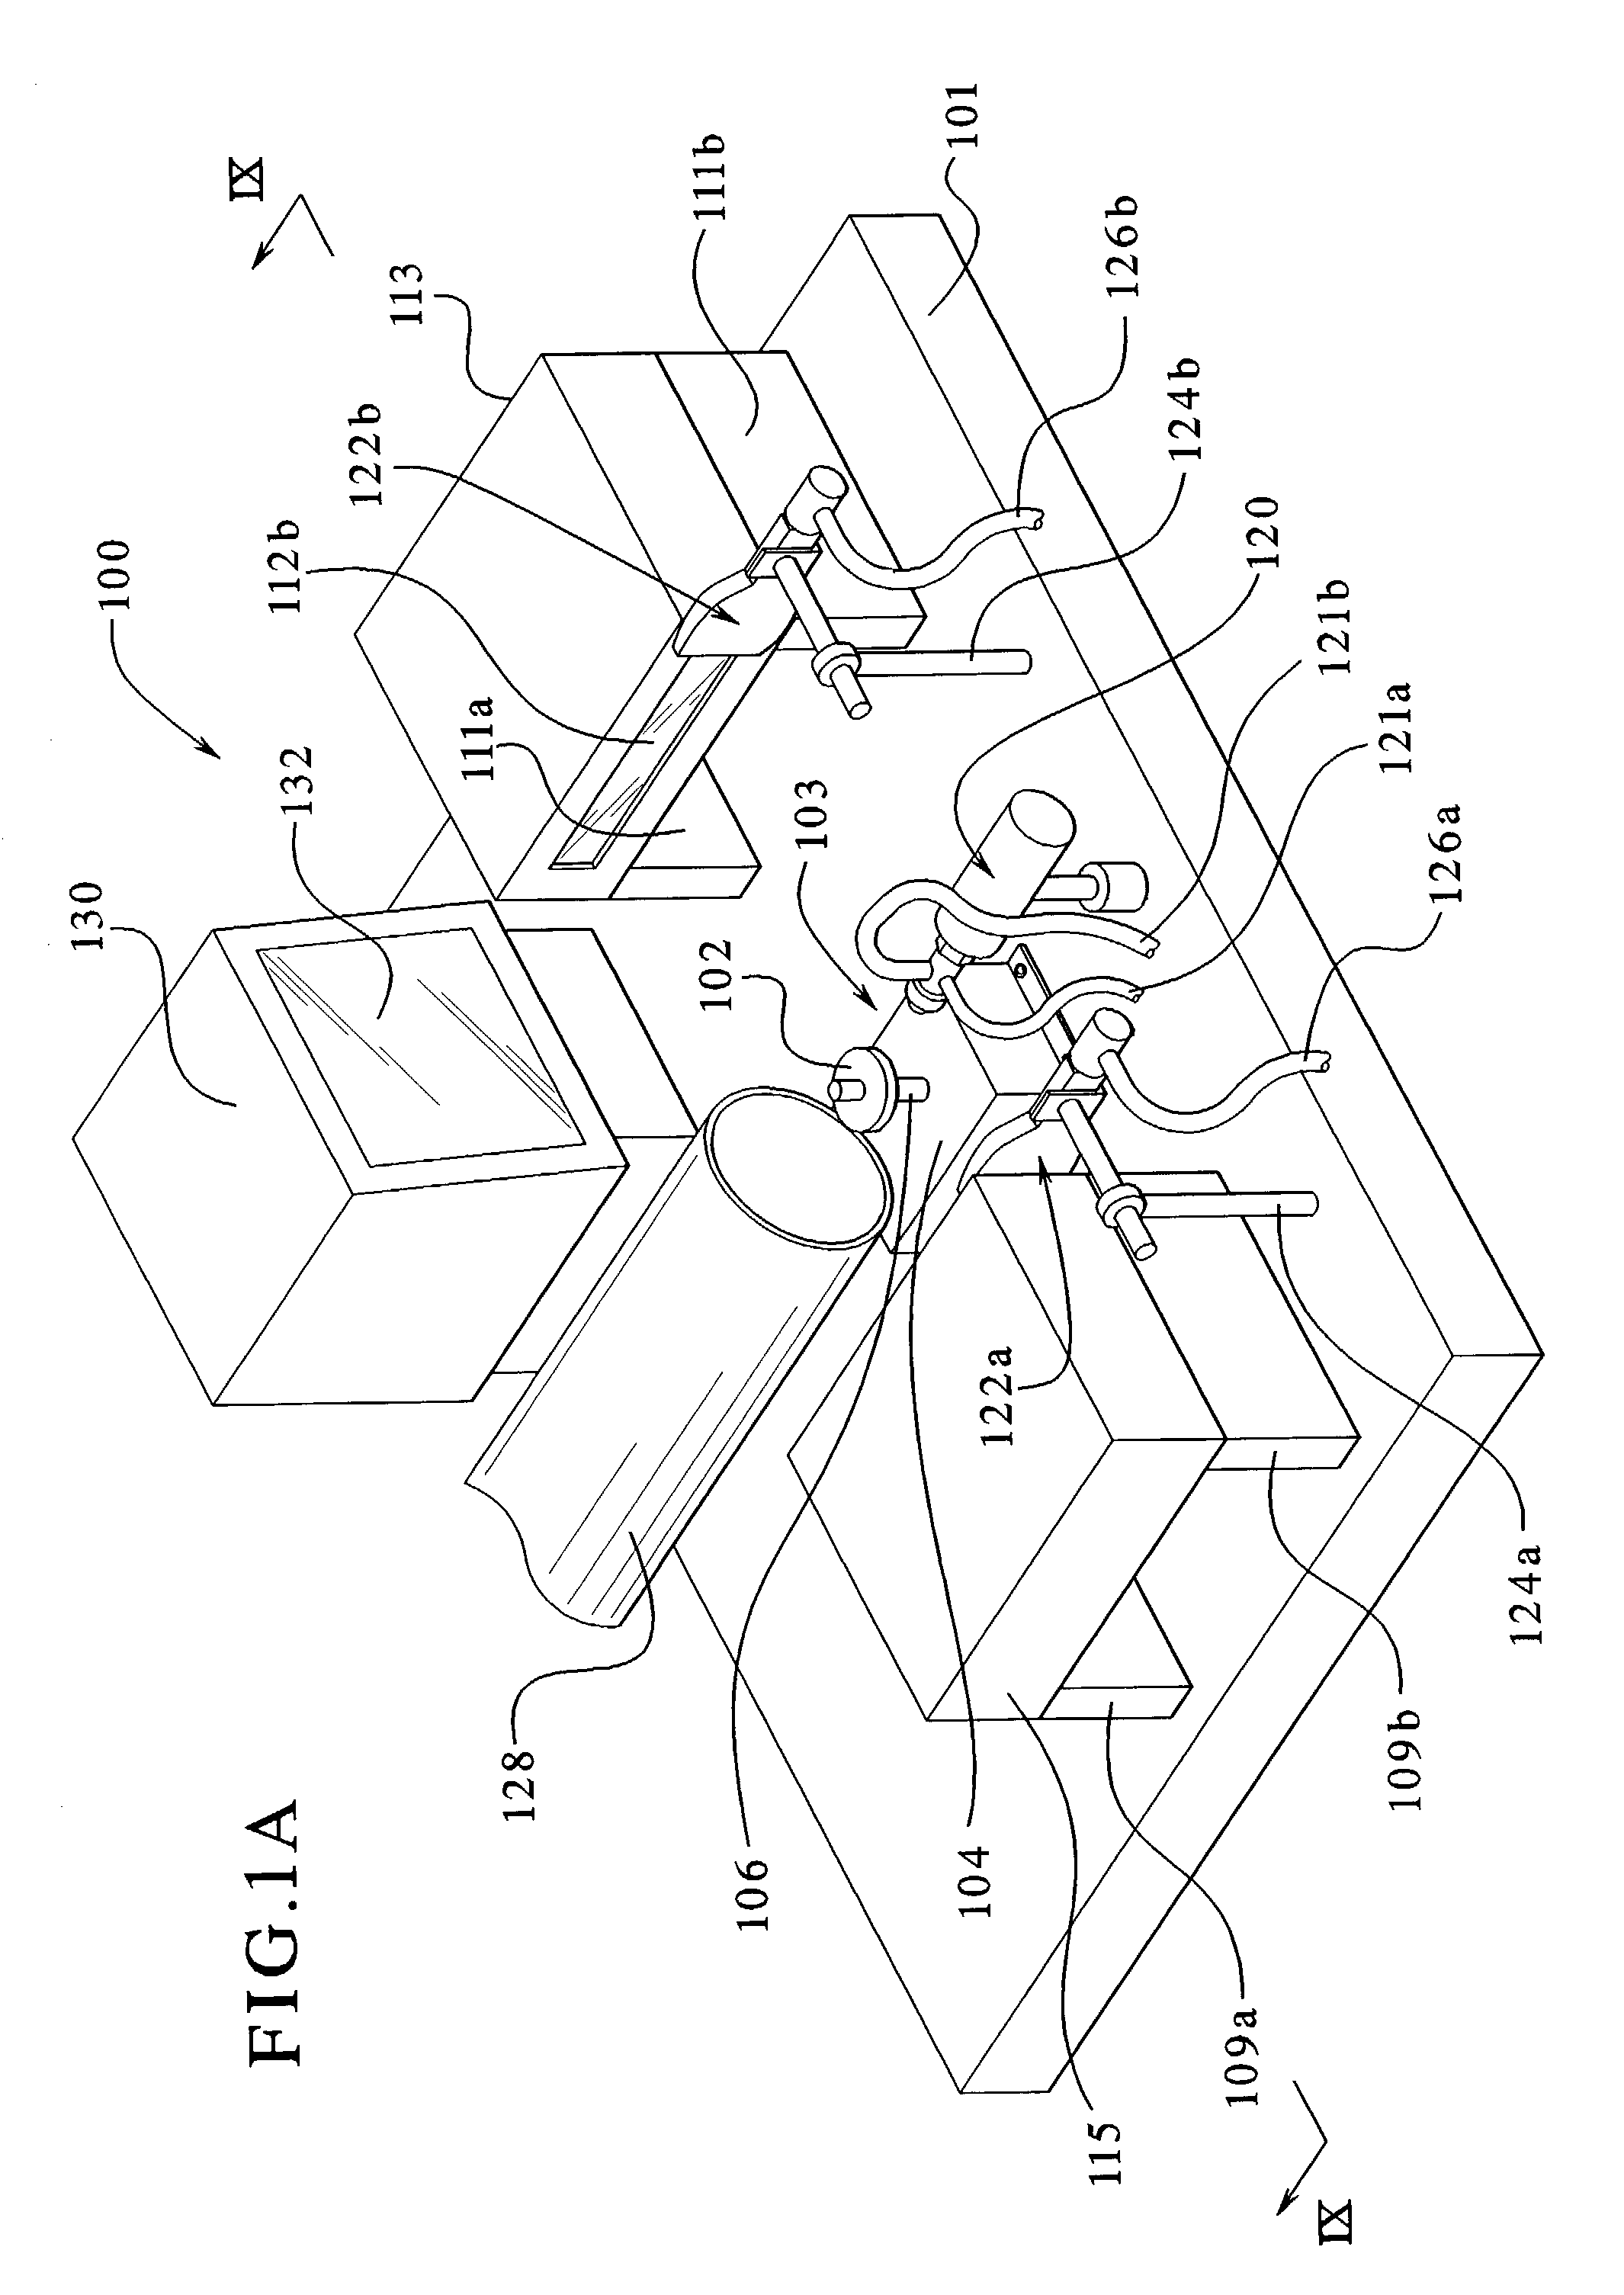 Method for simultaneously coating and measuring parts